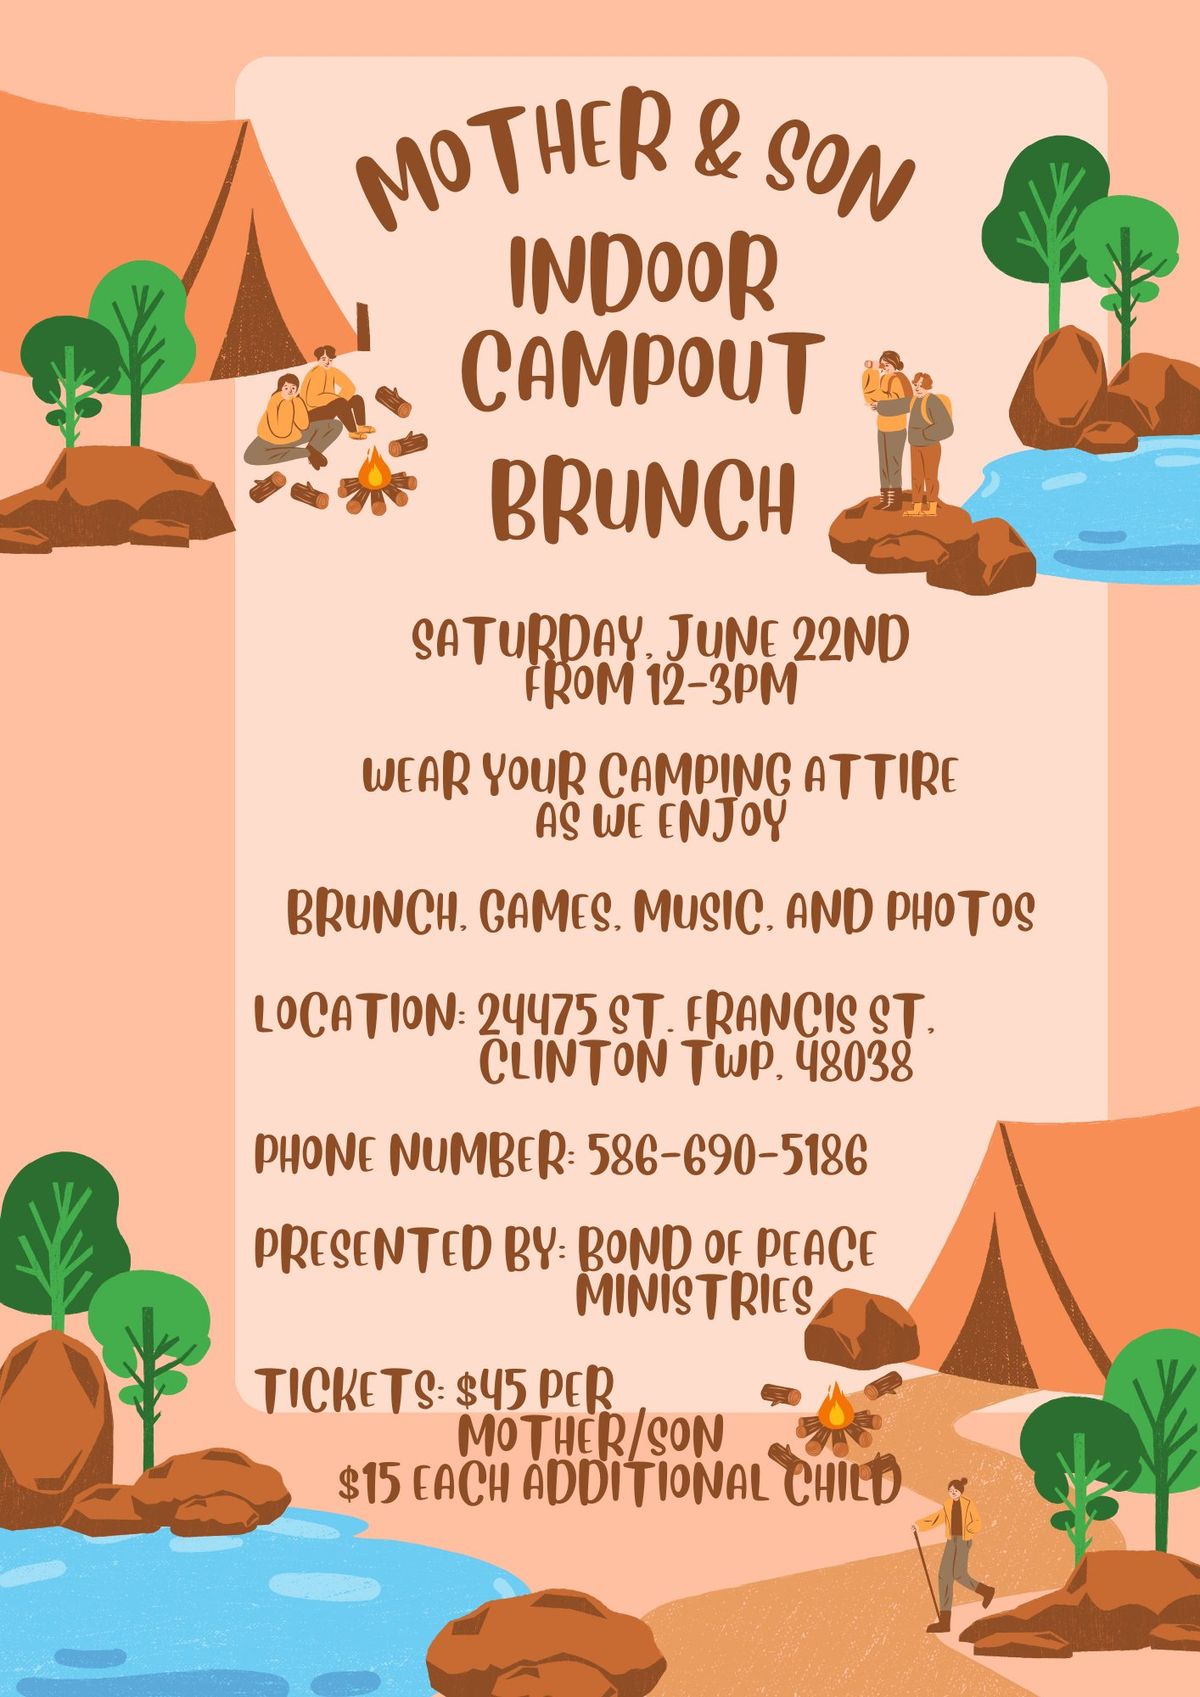 Mother & Son Indoor Campout Brunch